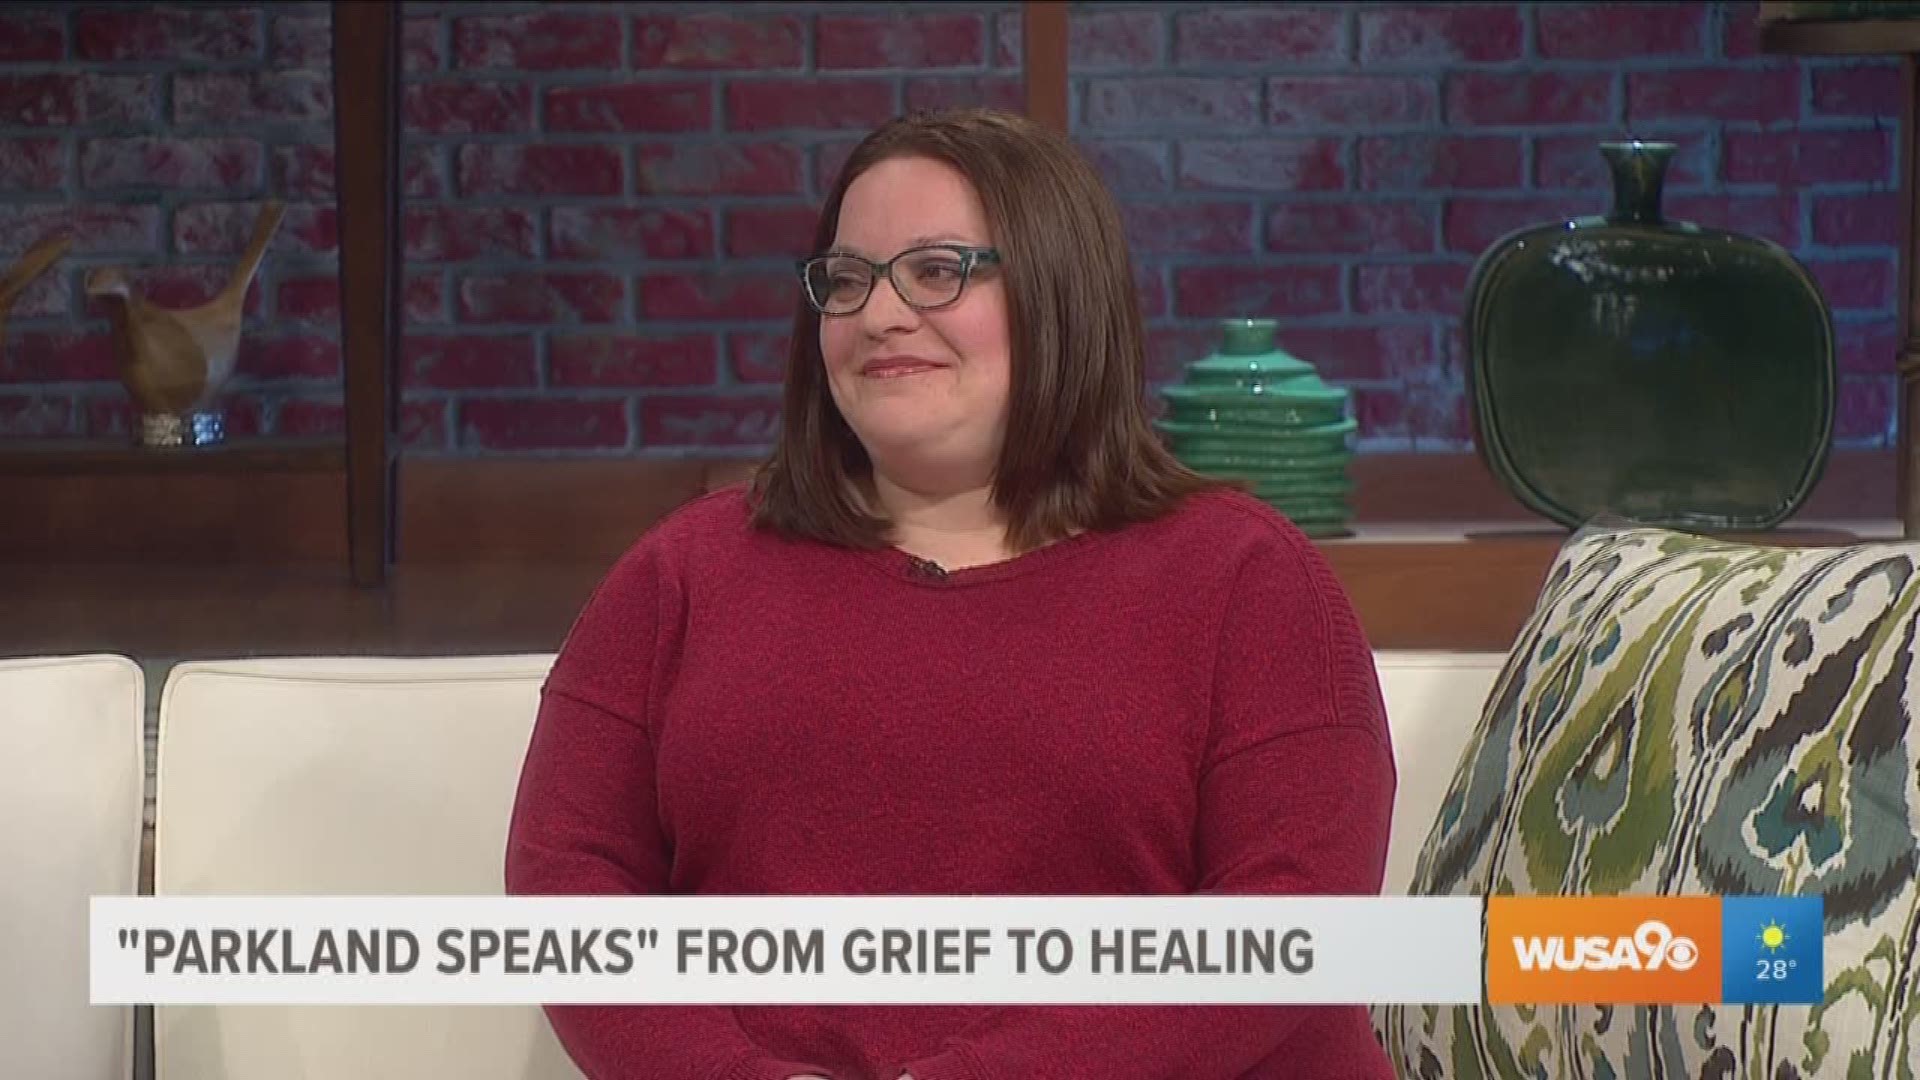 Sarah Lerner, a teacher at Marjory Stoneman Douglas High School in Parkland, FL talks about 'Parkland Speaks' a book that uses art to heal from the 2018 tragedy.